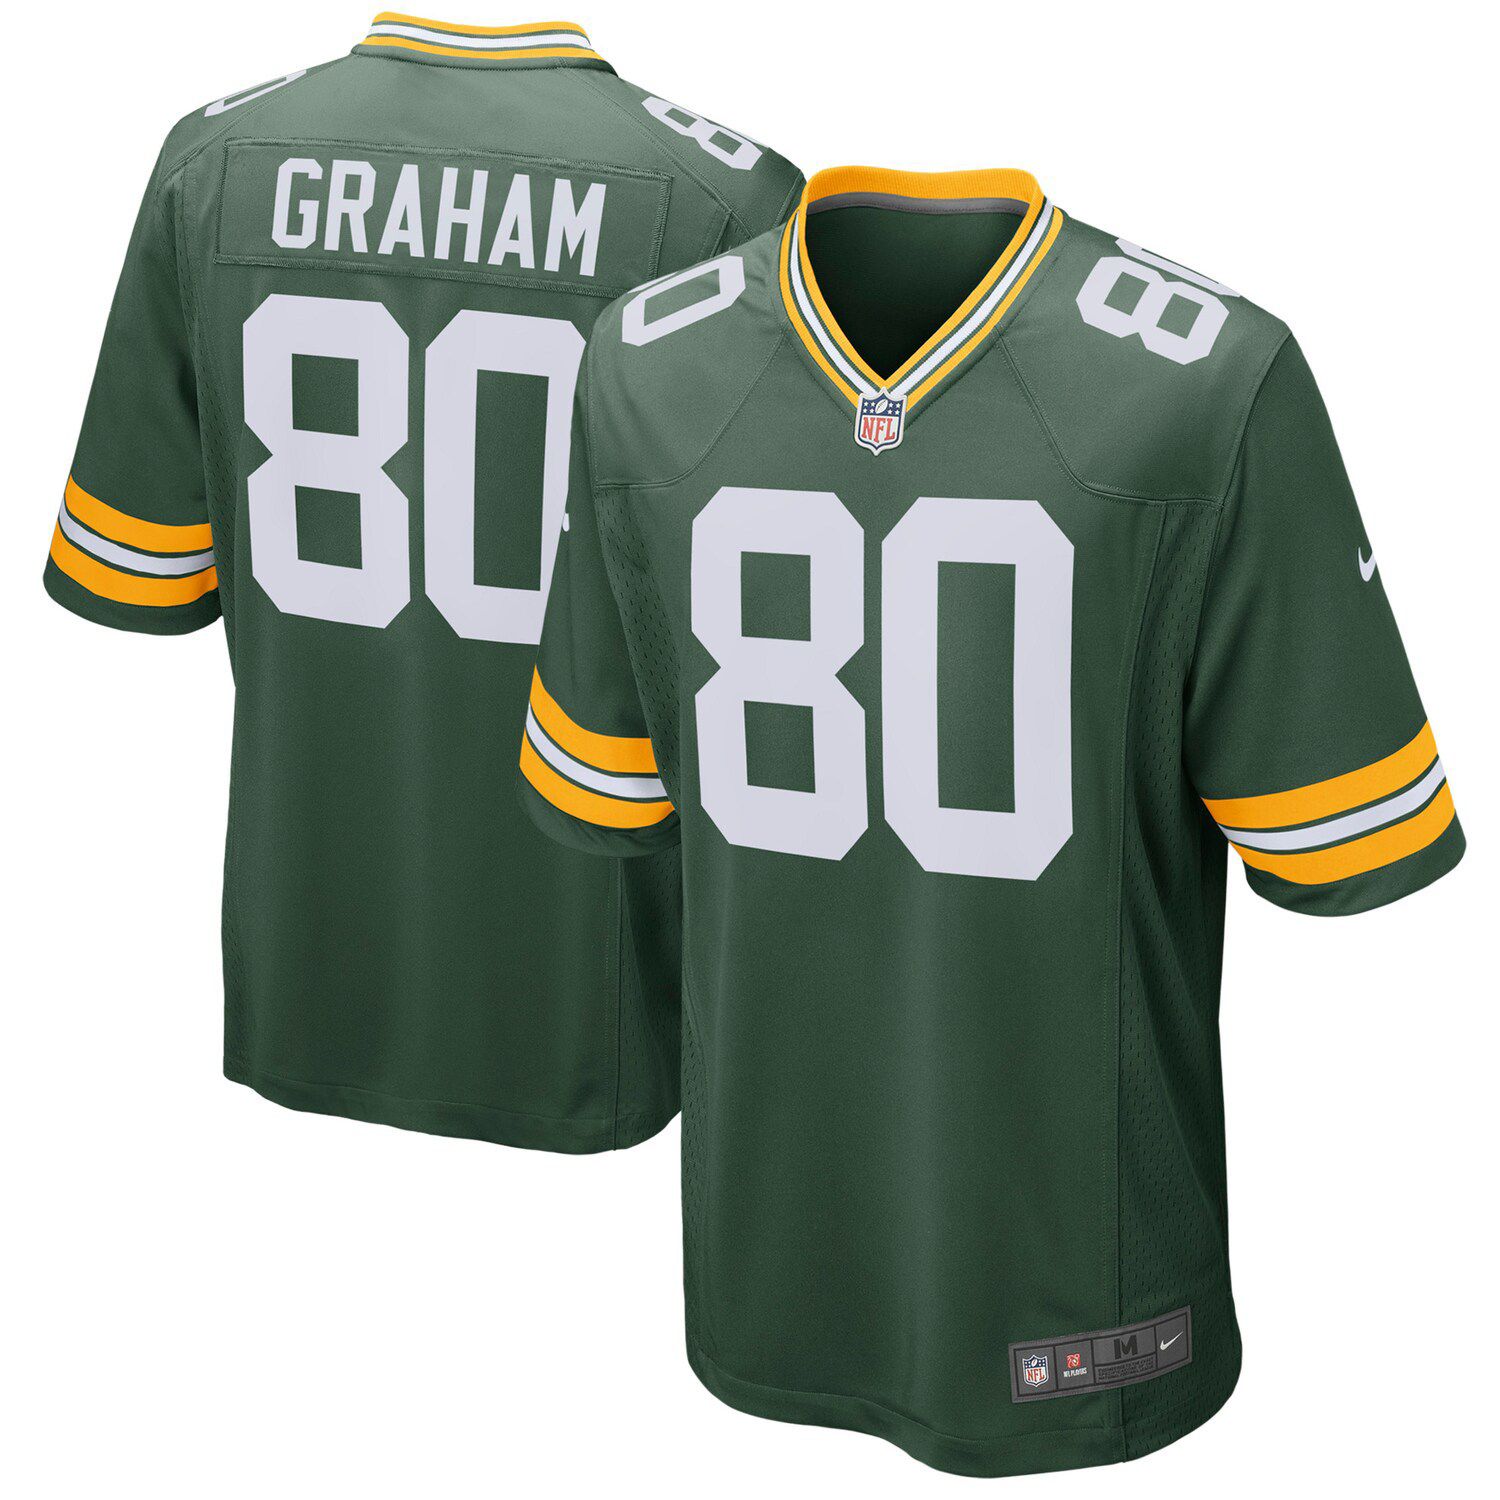 nelson packers jersey